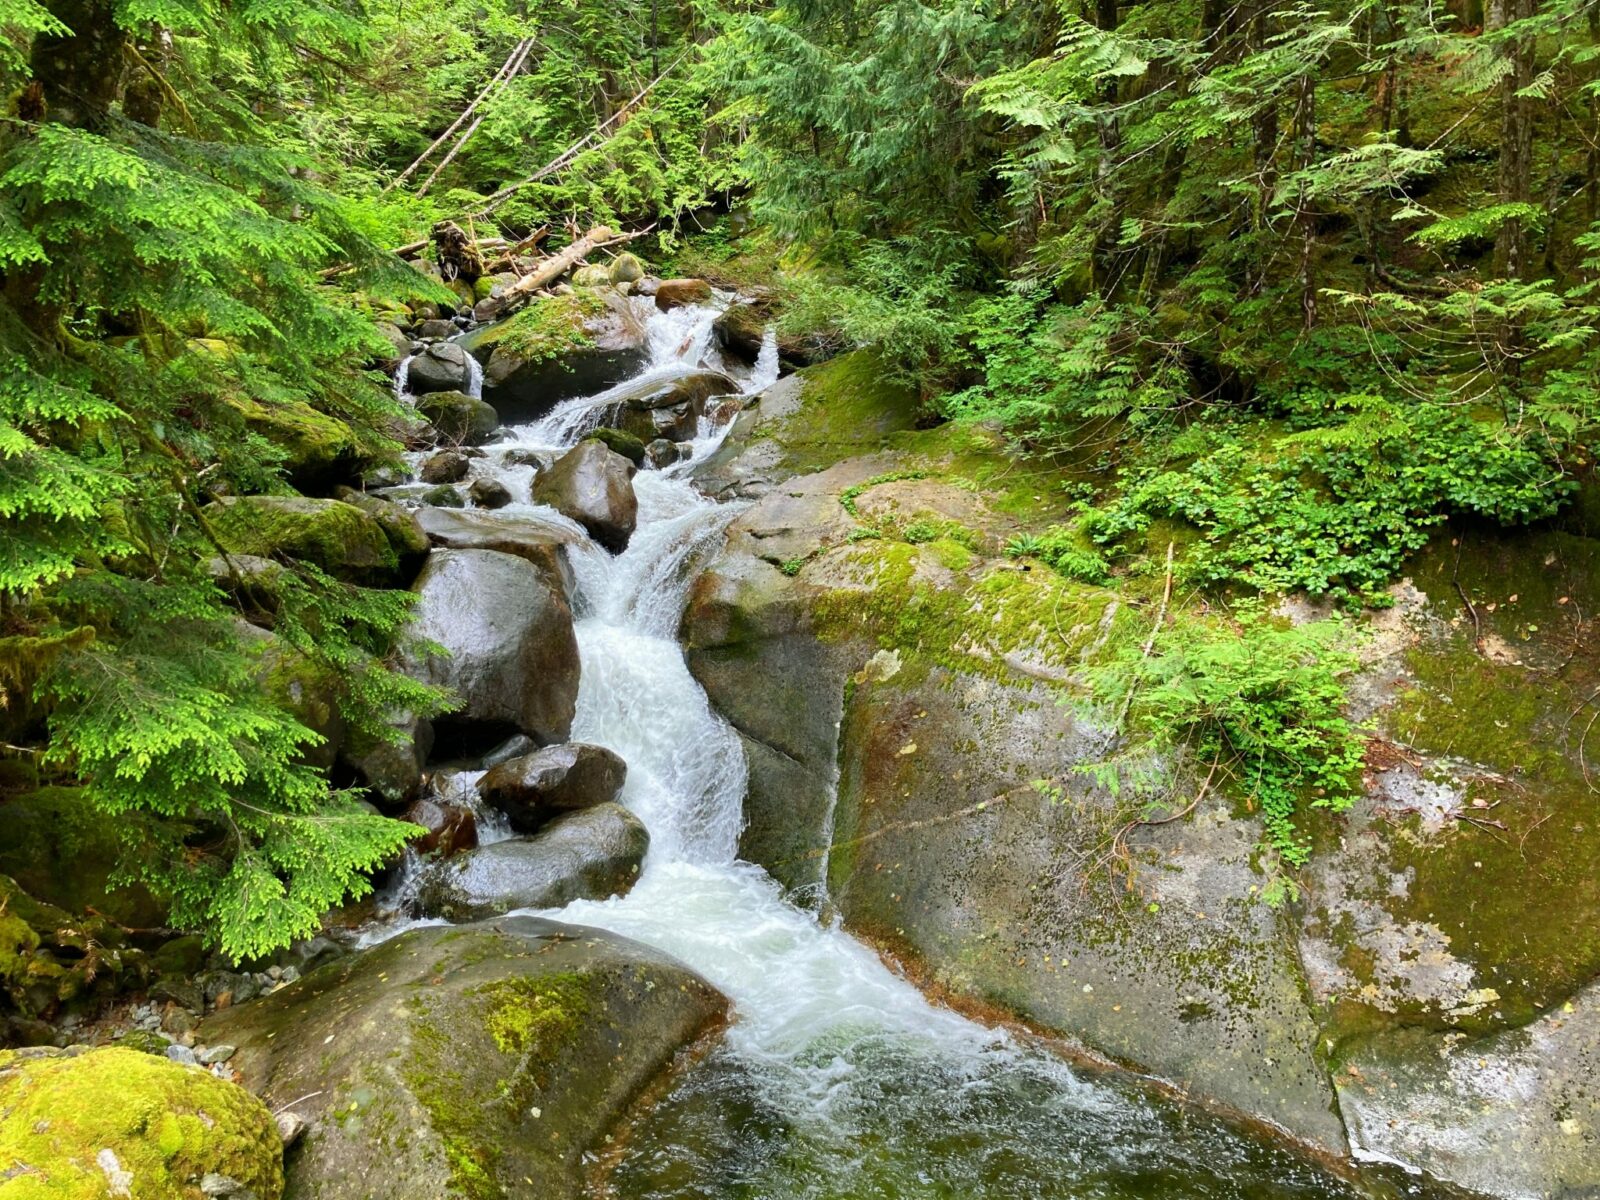 A mini waterfall over and between rocks and moss in an evergreen forest along the Snoqualmie Lake Trail to Otter Falls